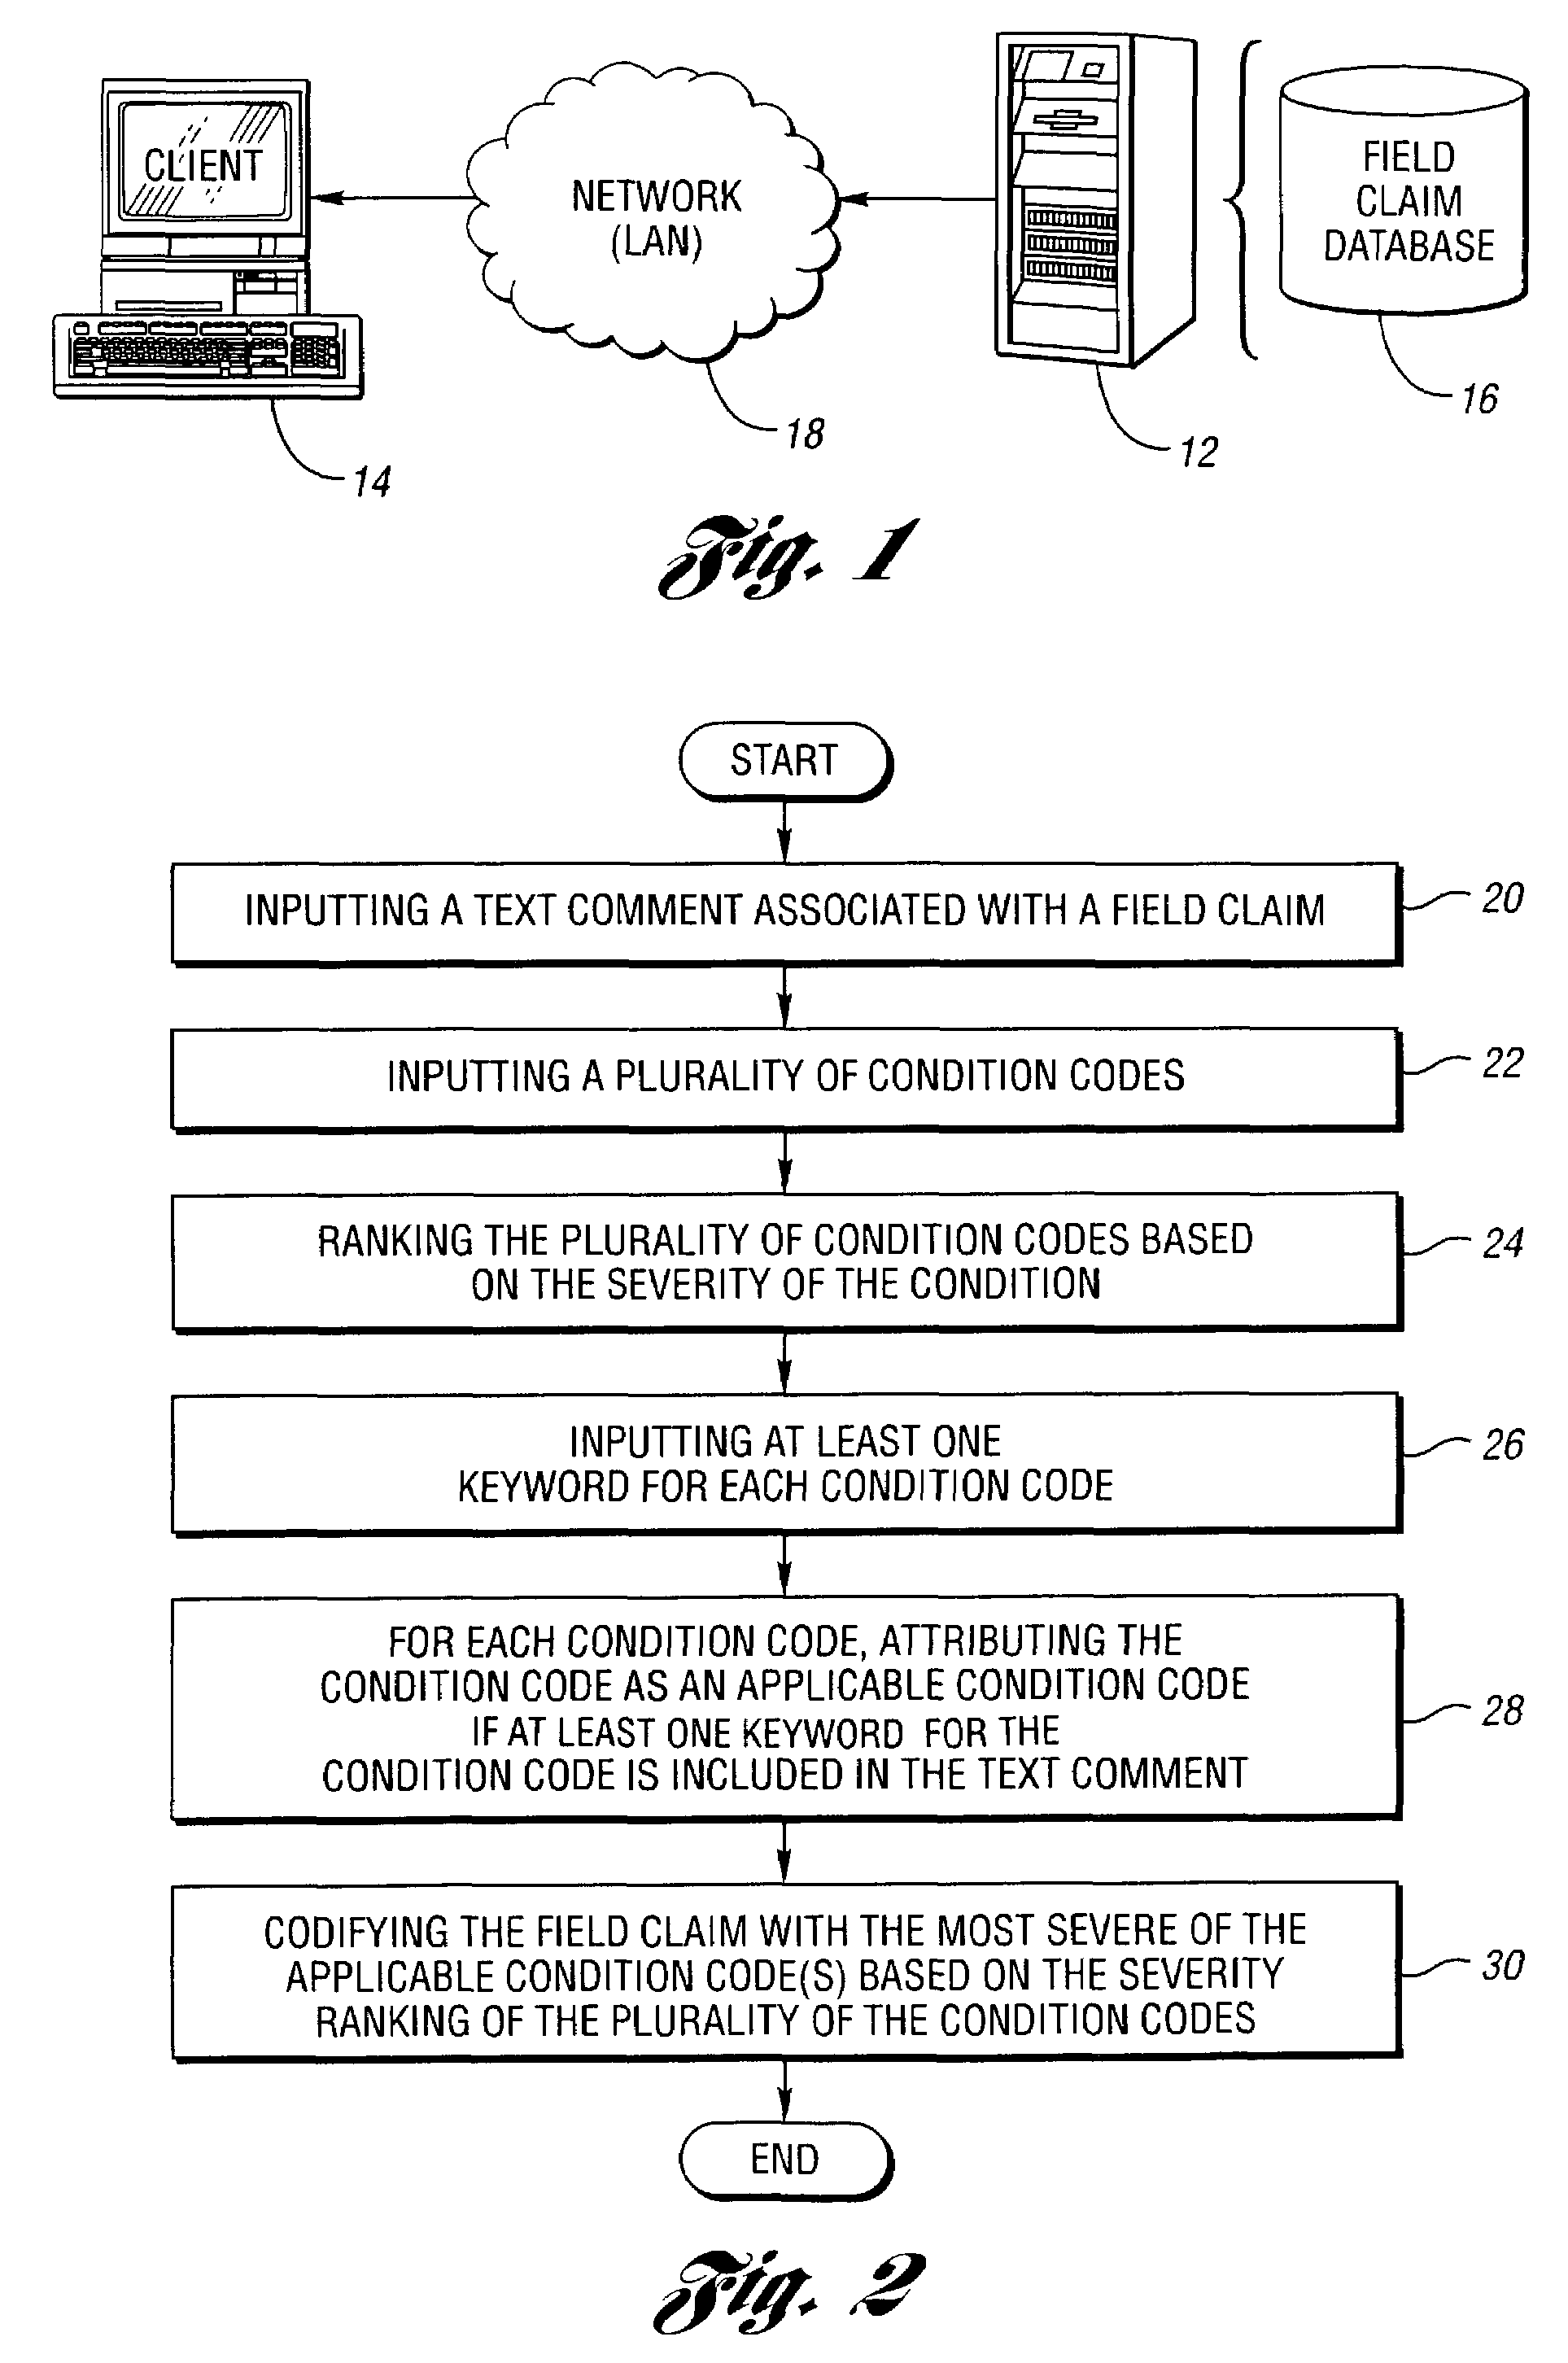 Computer-implemented method and system for attributing applicable condition codes to field claims